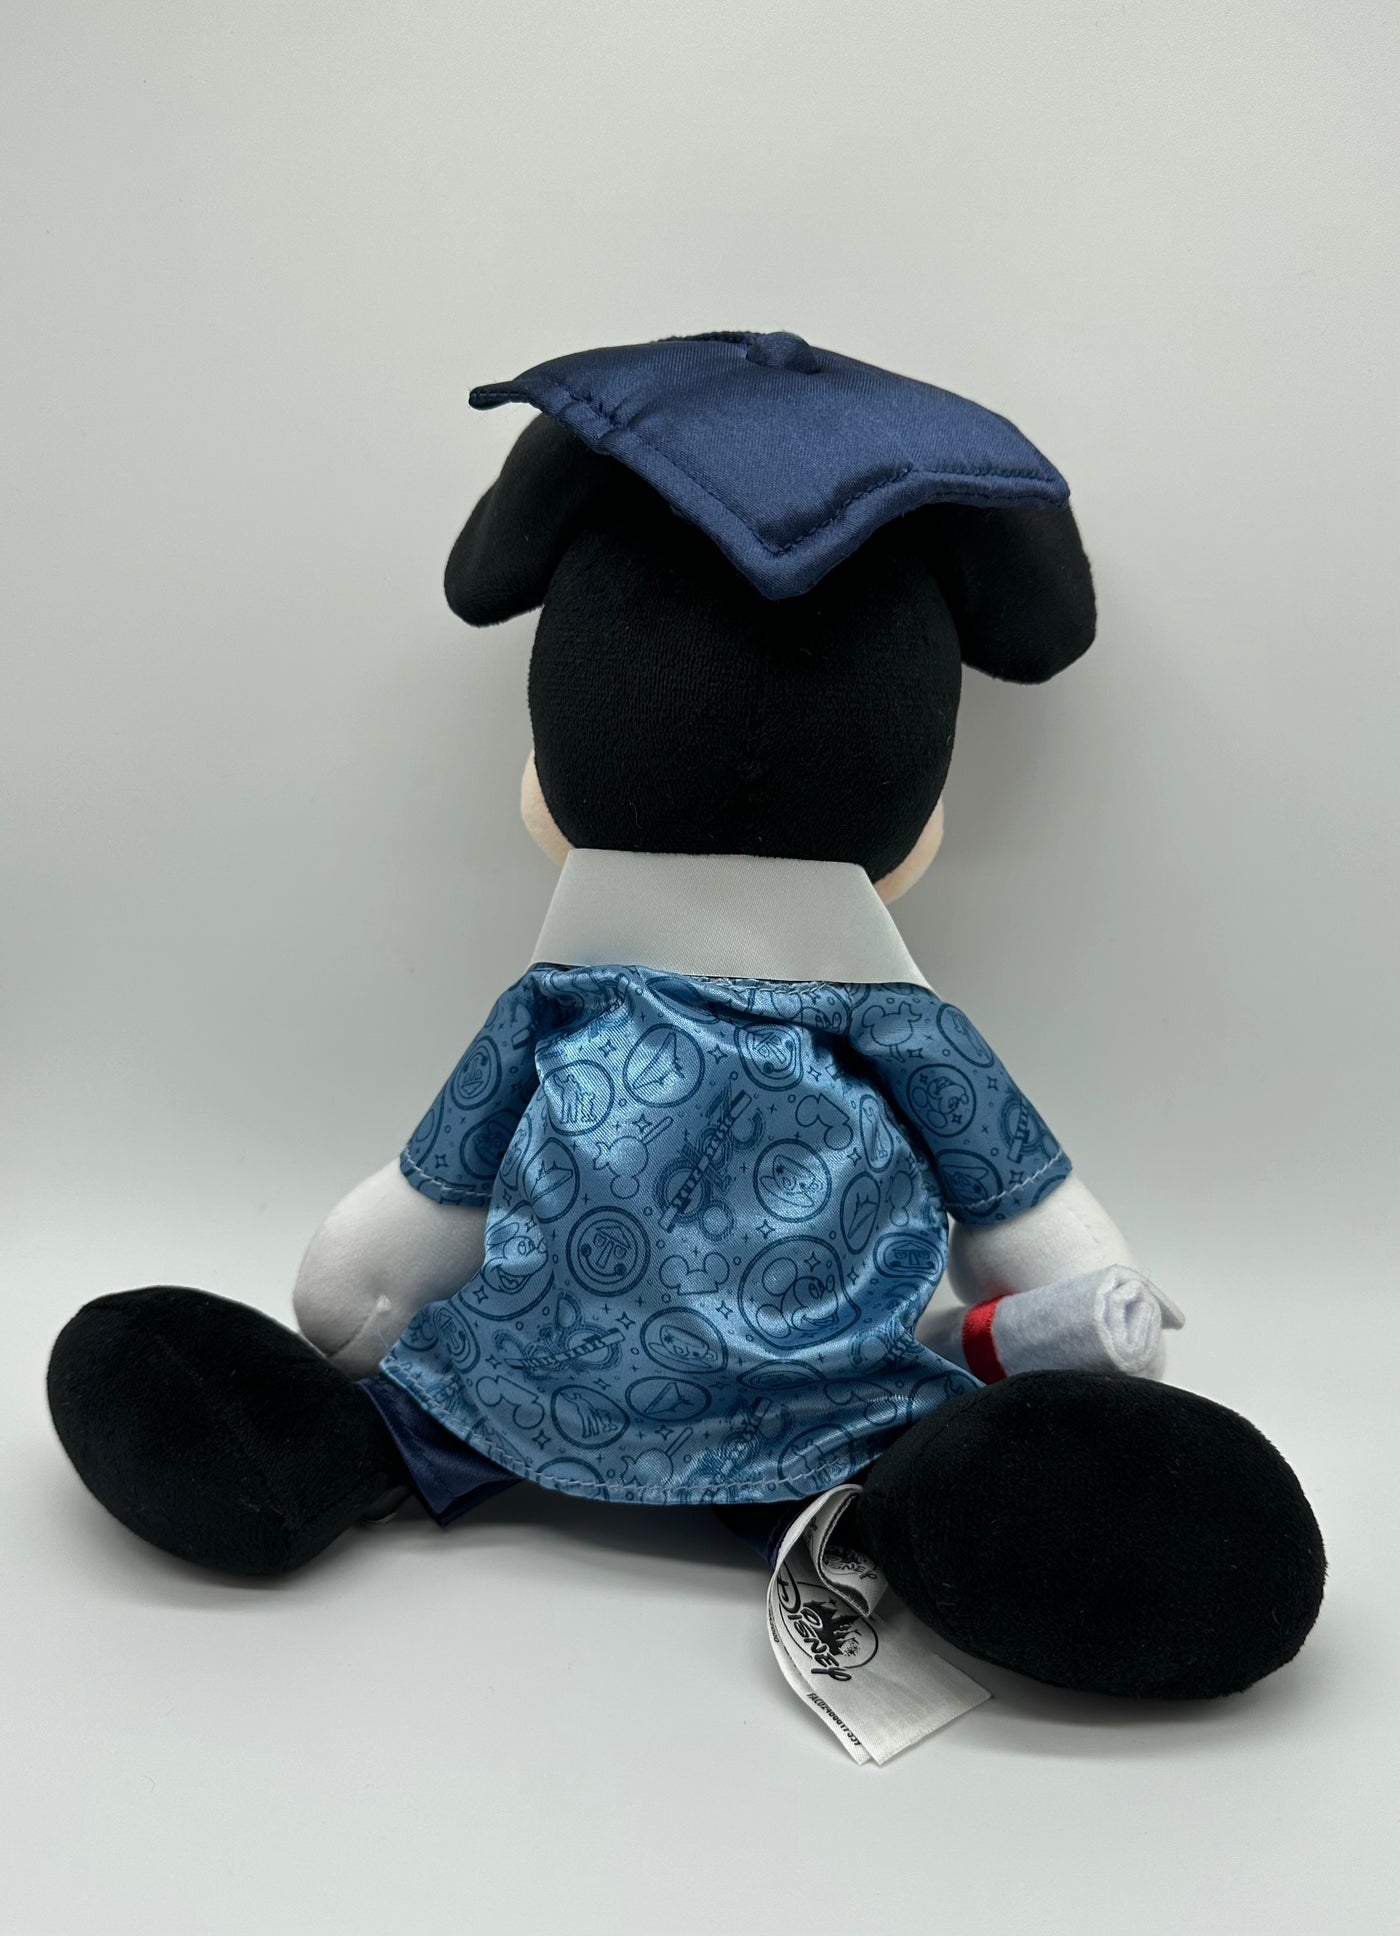 Disney Parks Class of 2018 Mickey Graduation Plush New with Tag